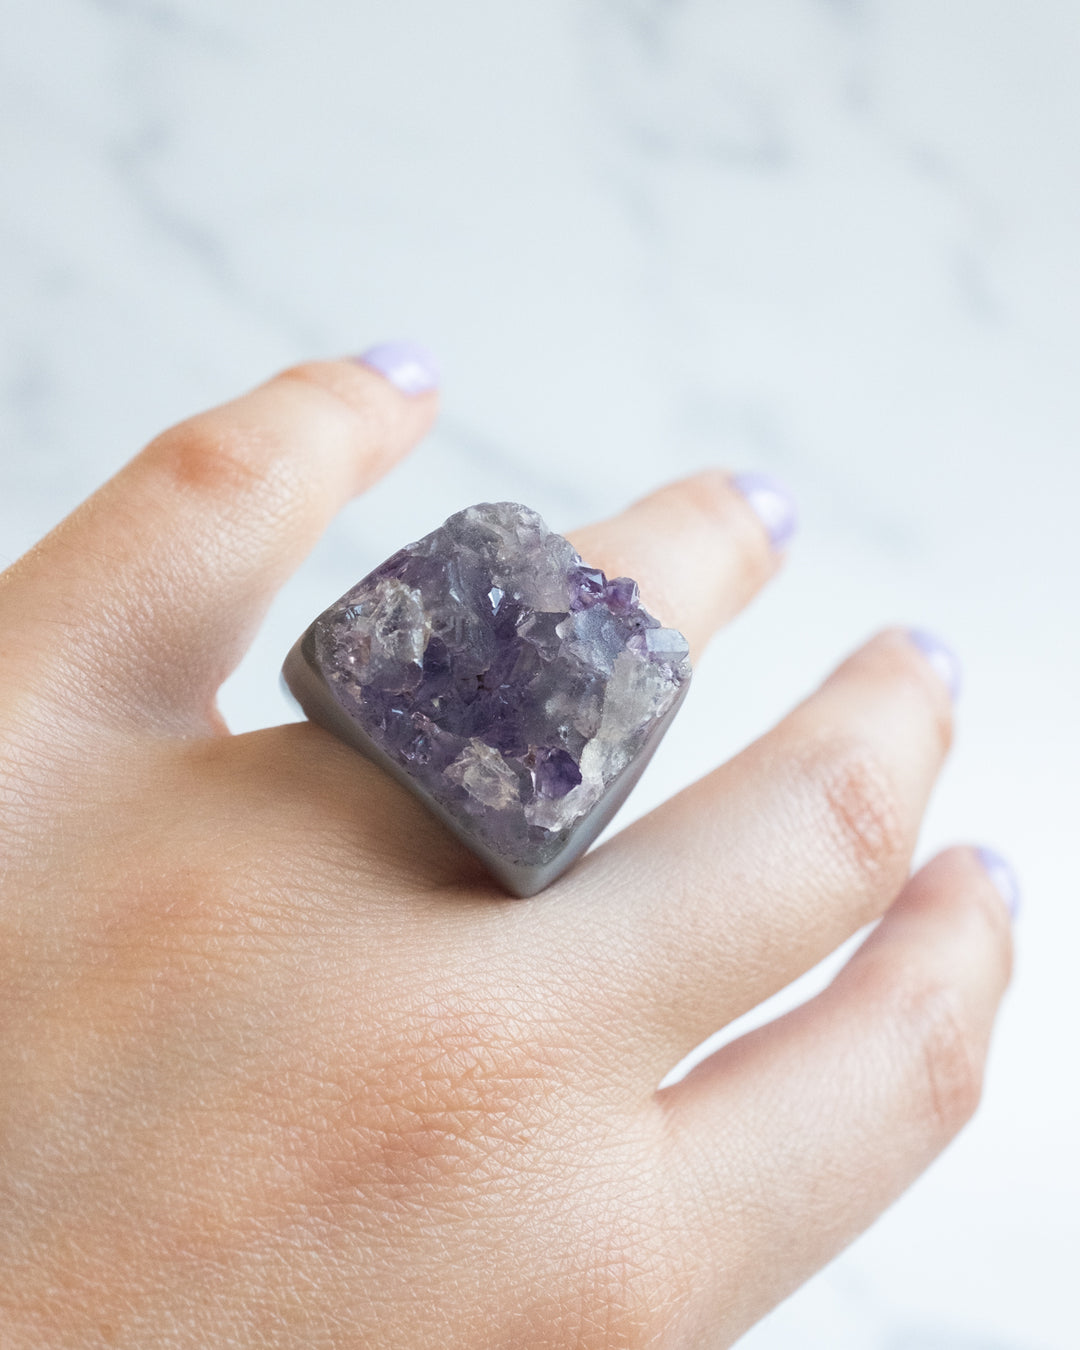 Raw Amethyst Ring - Size 6 3/4 US / N 1/2 UK - The Healing Pear